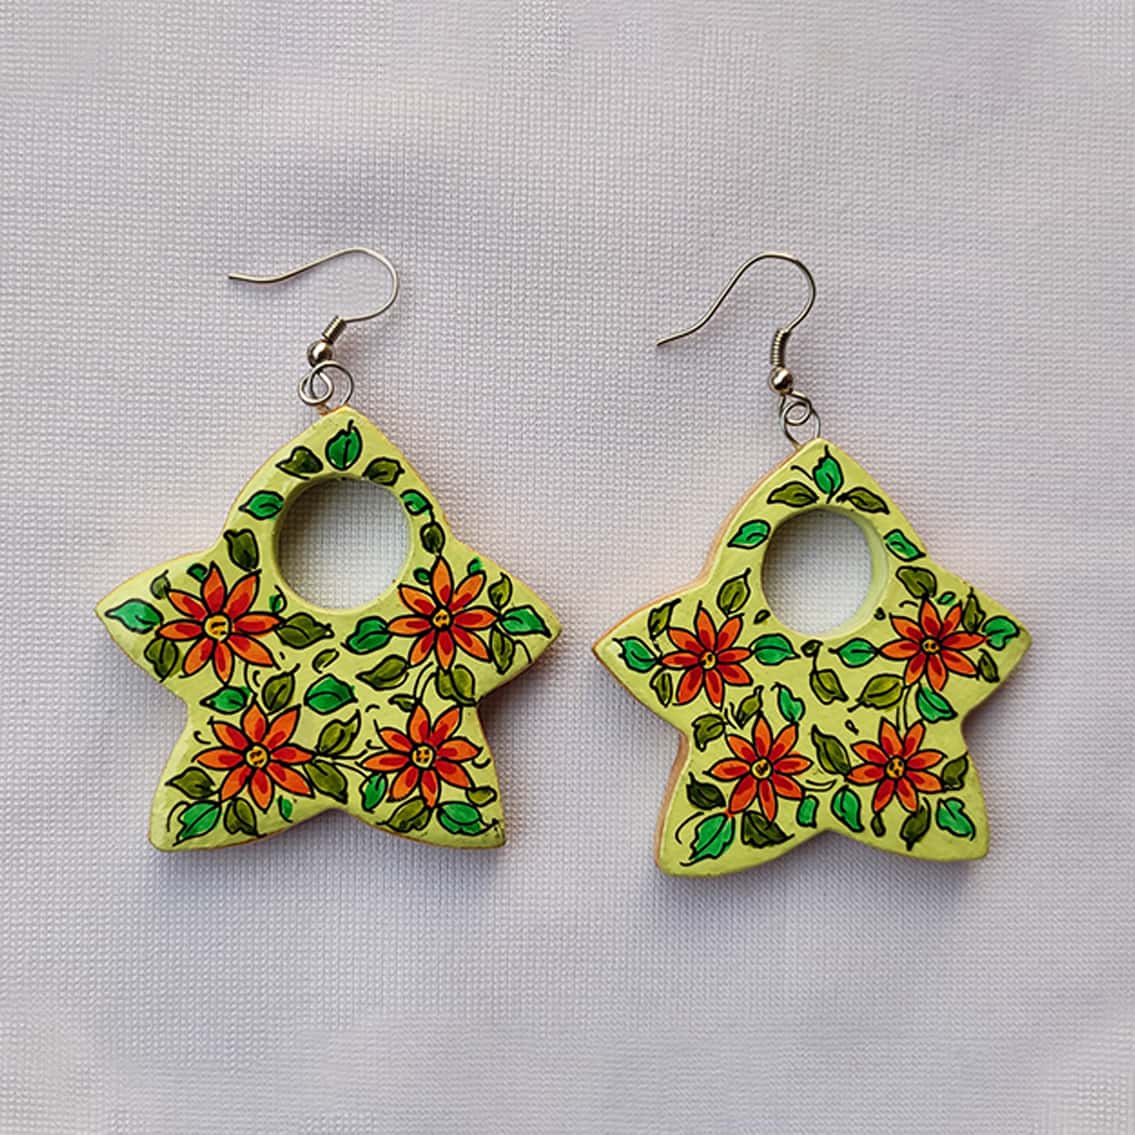 Cute Star Floral Hand Painted Green Earring